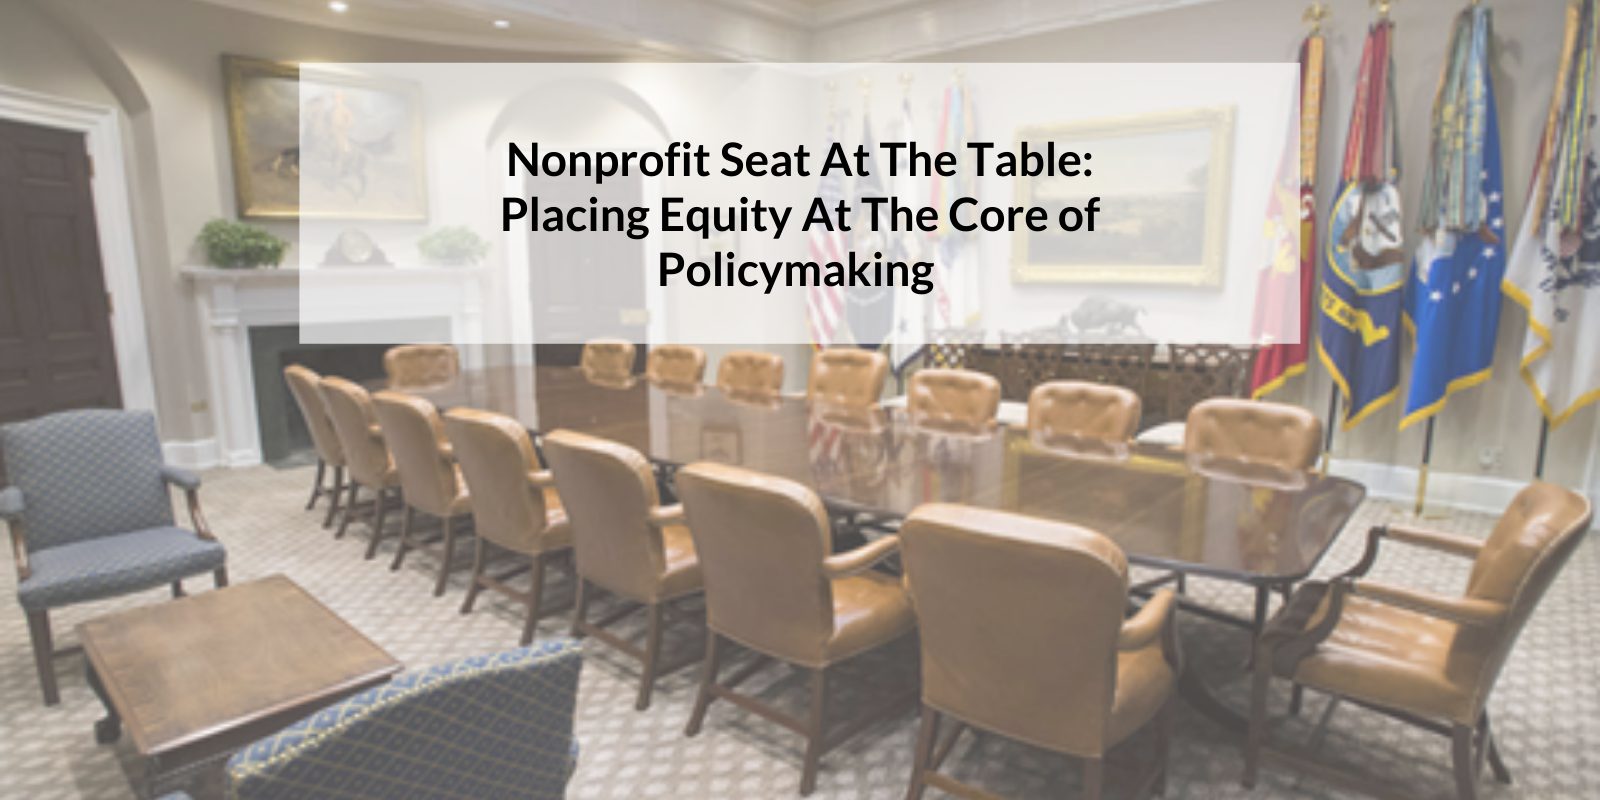 Nonproffit seat at the table: Placing equity at the core of policymaking